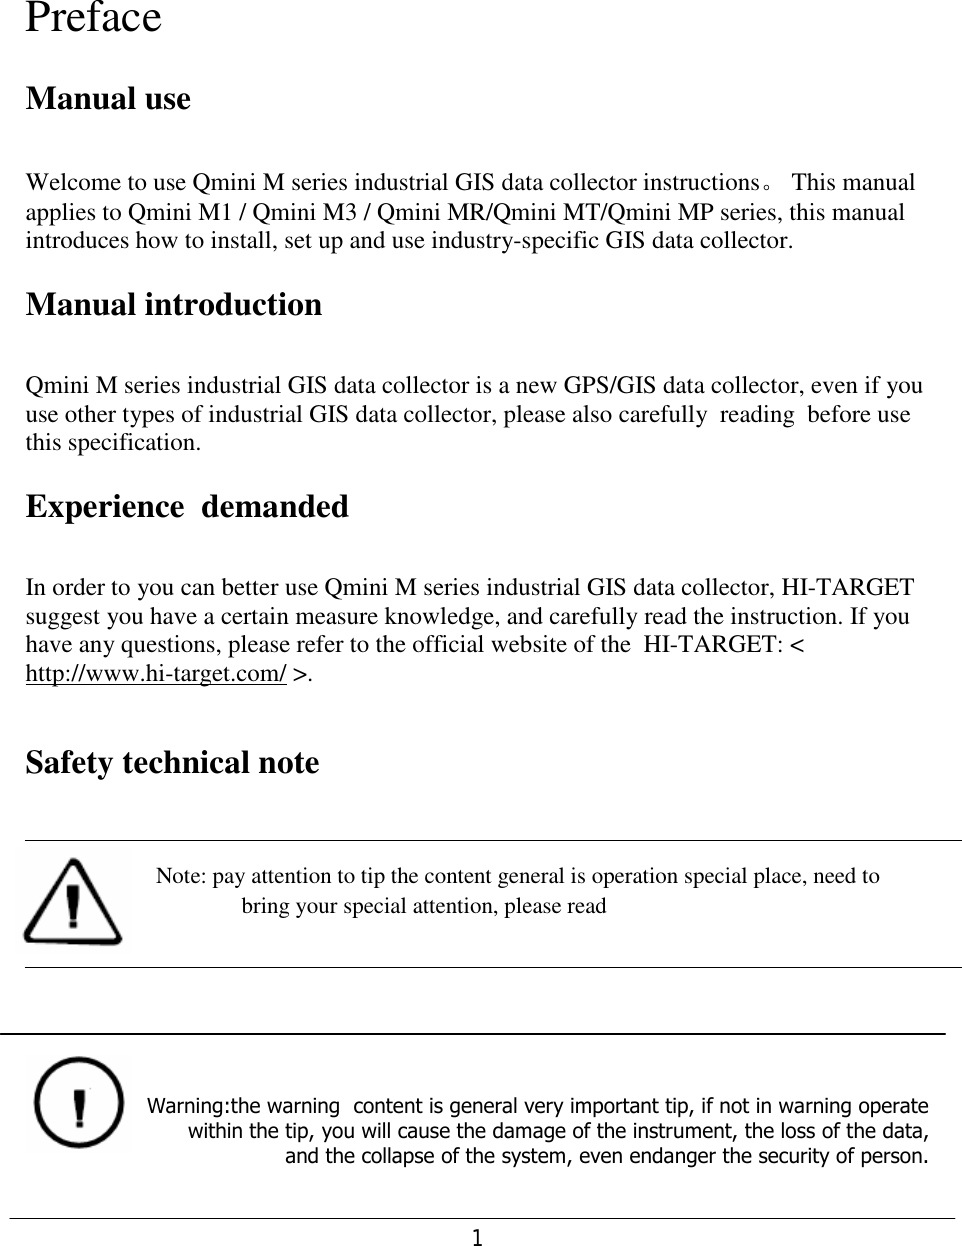 1  Preface Manual use Welcome to use Qmini M series industrial GIS data collector instructions。 This manual applies to Qmini M1 / Qmini M3 / Qmini MR/Qmini MT/Qmini MP series, this manual introduces how to install, set up and use industry-specific GIS data collector. Manual introduction Qmini M series industrial GIS data collector is a new GPS/GIS data collector, even if you use other types of industrial GIS data collector, please also carefully  reading  before use  this specification. Experience  demanded In order to you can better use Qmini M series industrial GIS data collector, HI-TARGET suggest you have a certain measure knowledge, and carefully read the instruction. If you have any questions, please refer to the official website of the  HI-TARGET: &lt; http://www.hi-target.com/ &gt;.  Safety technical note Note: pay attention to tip the content general is operation special place, need to bring your special attention, please read                                                                                                                                                                                                  Warning:the warning  content is general very important tip, if not in warning operate                       within the tip, you will cause the damage of the instrument, the loss of the data,  and the collapse of the system, even endanger the security of person. 